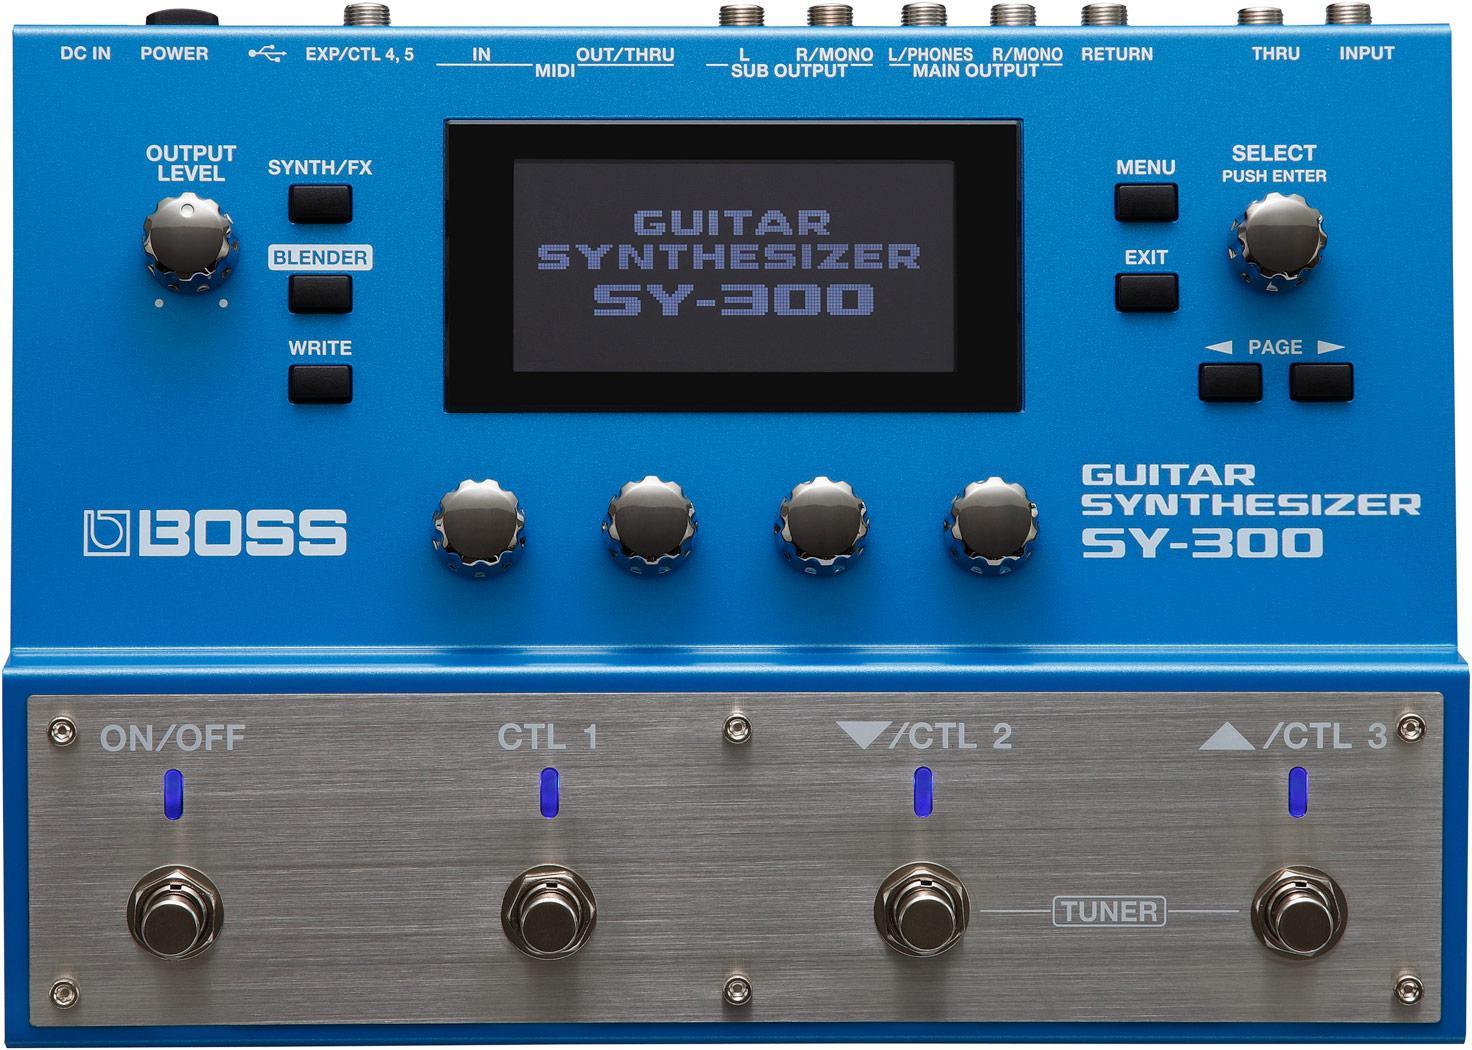 Guitar synthesizer Boss SY-300